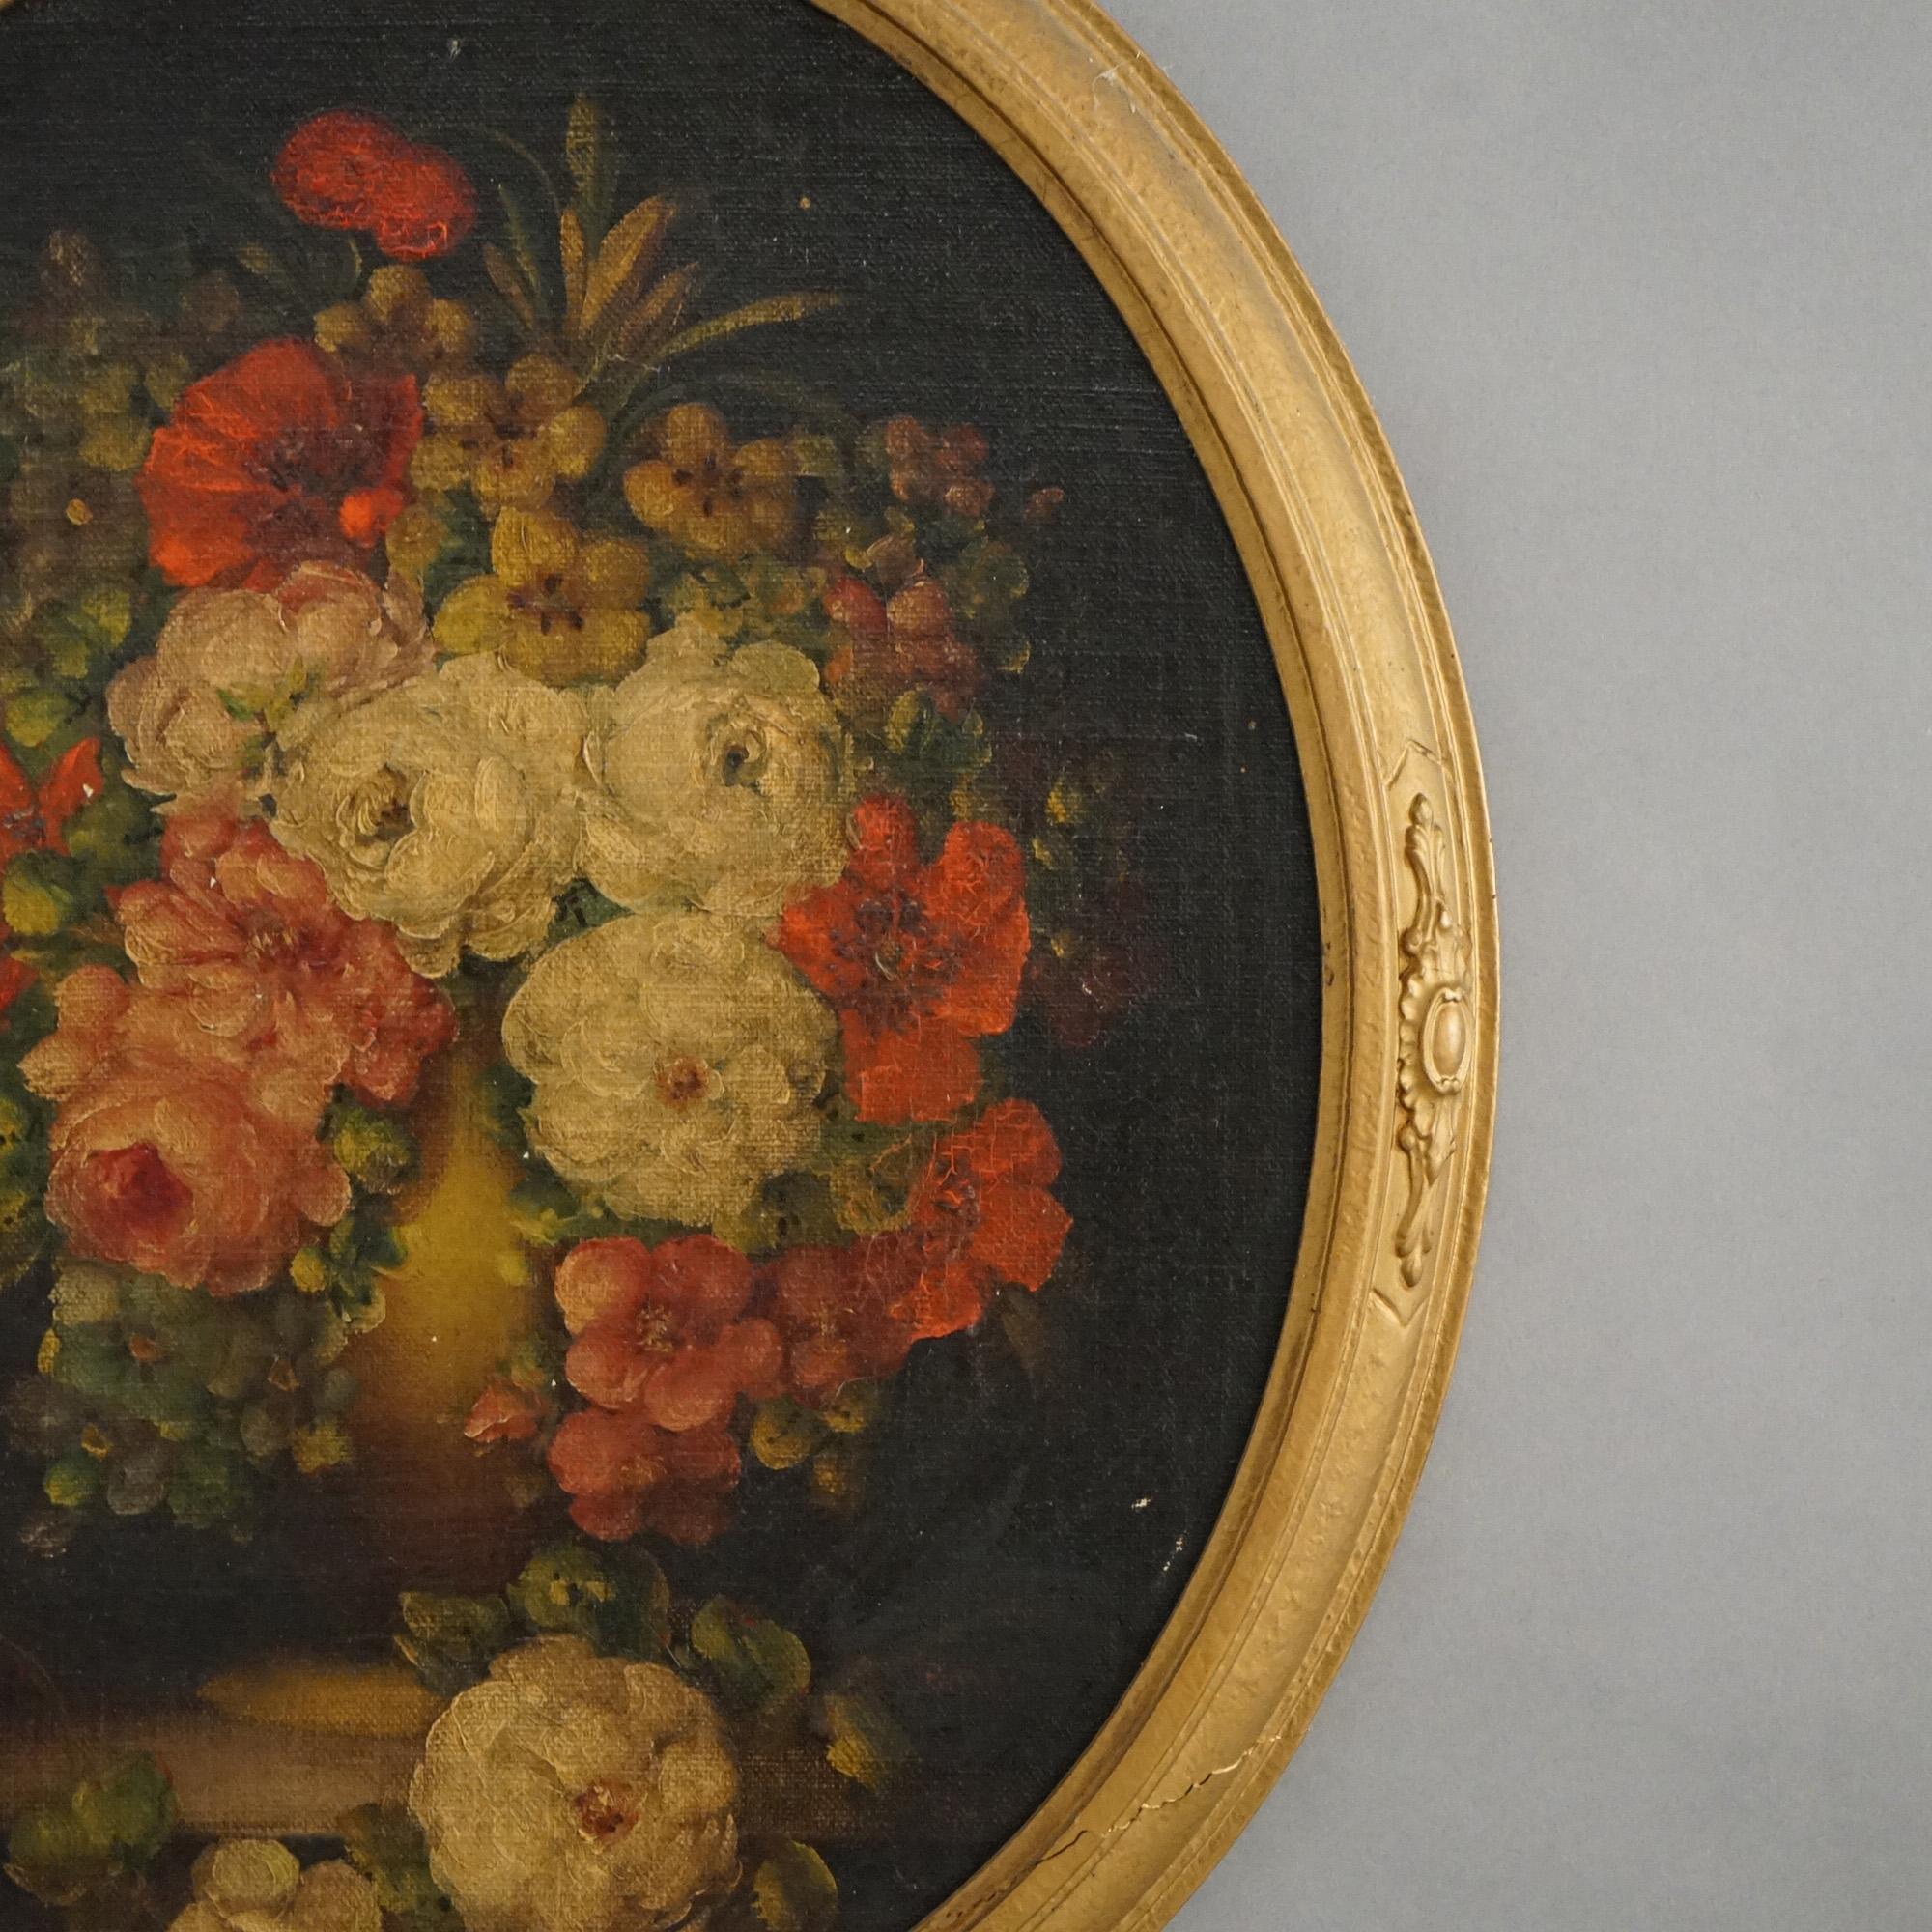 Hand-Painted Antique Floral Still Life Oil Painting, Signed, Circa 1920